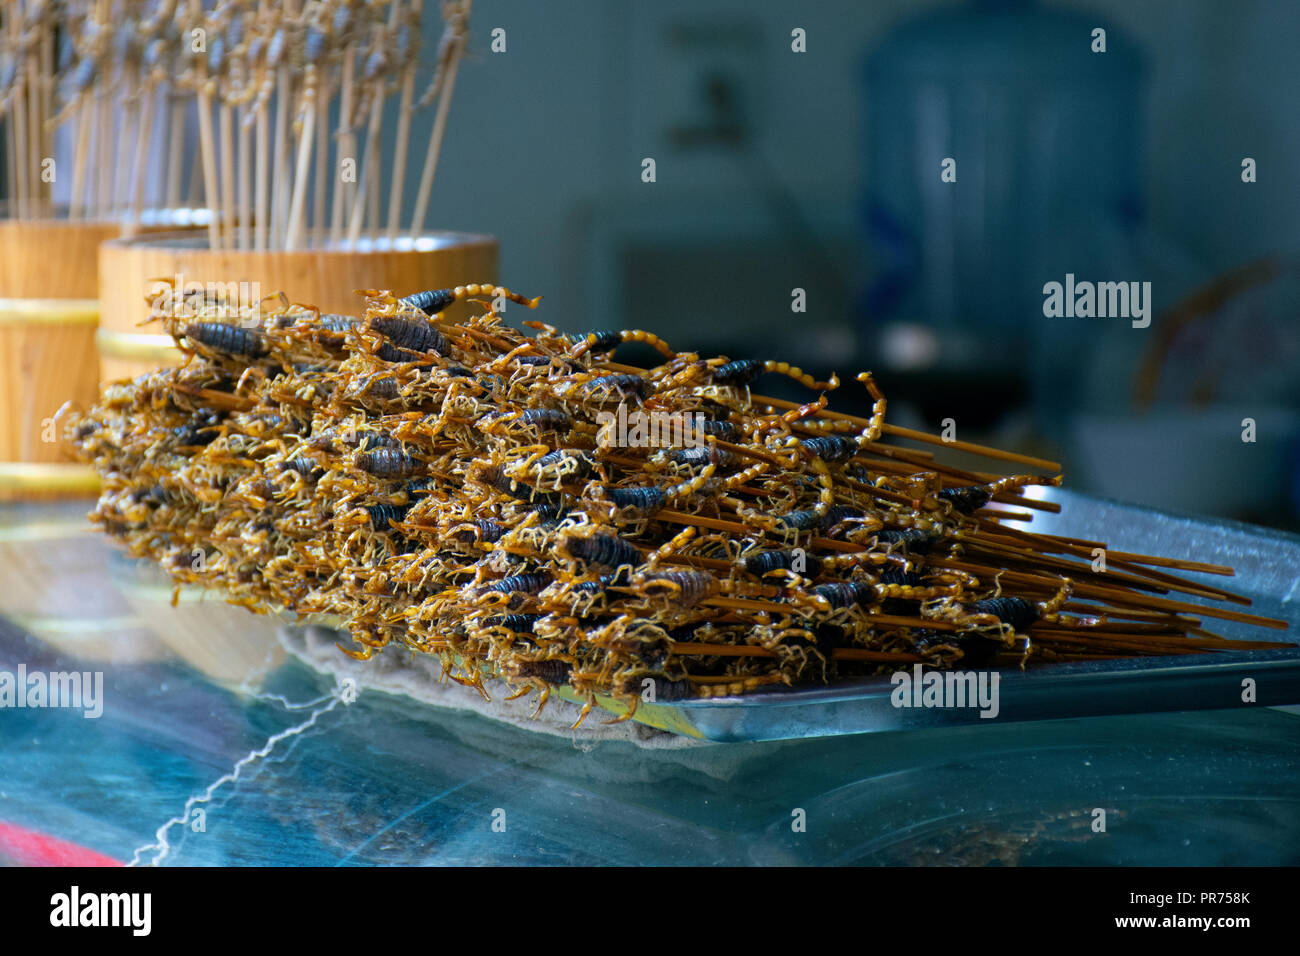 Black scorpions in a stick, exotic snack sold at the Wangfujing Snack Street, Beijing, China Stock Photo